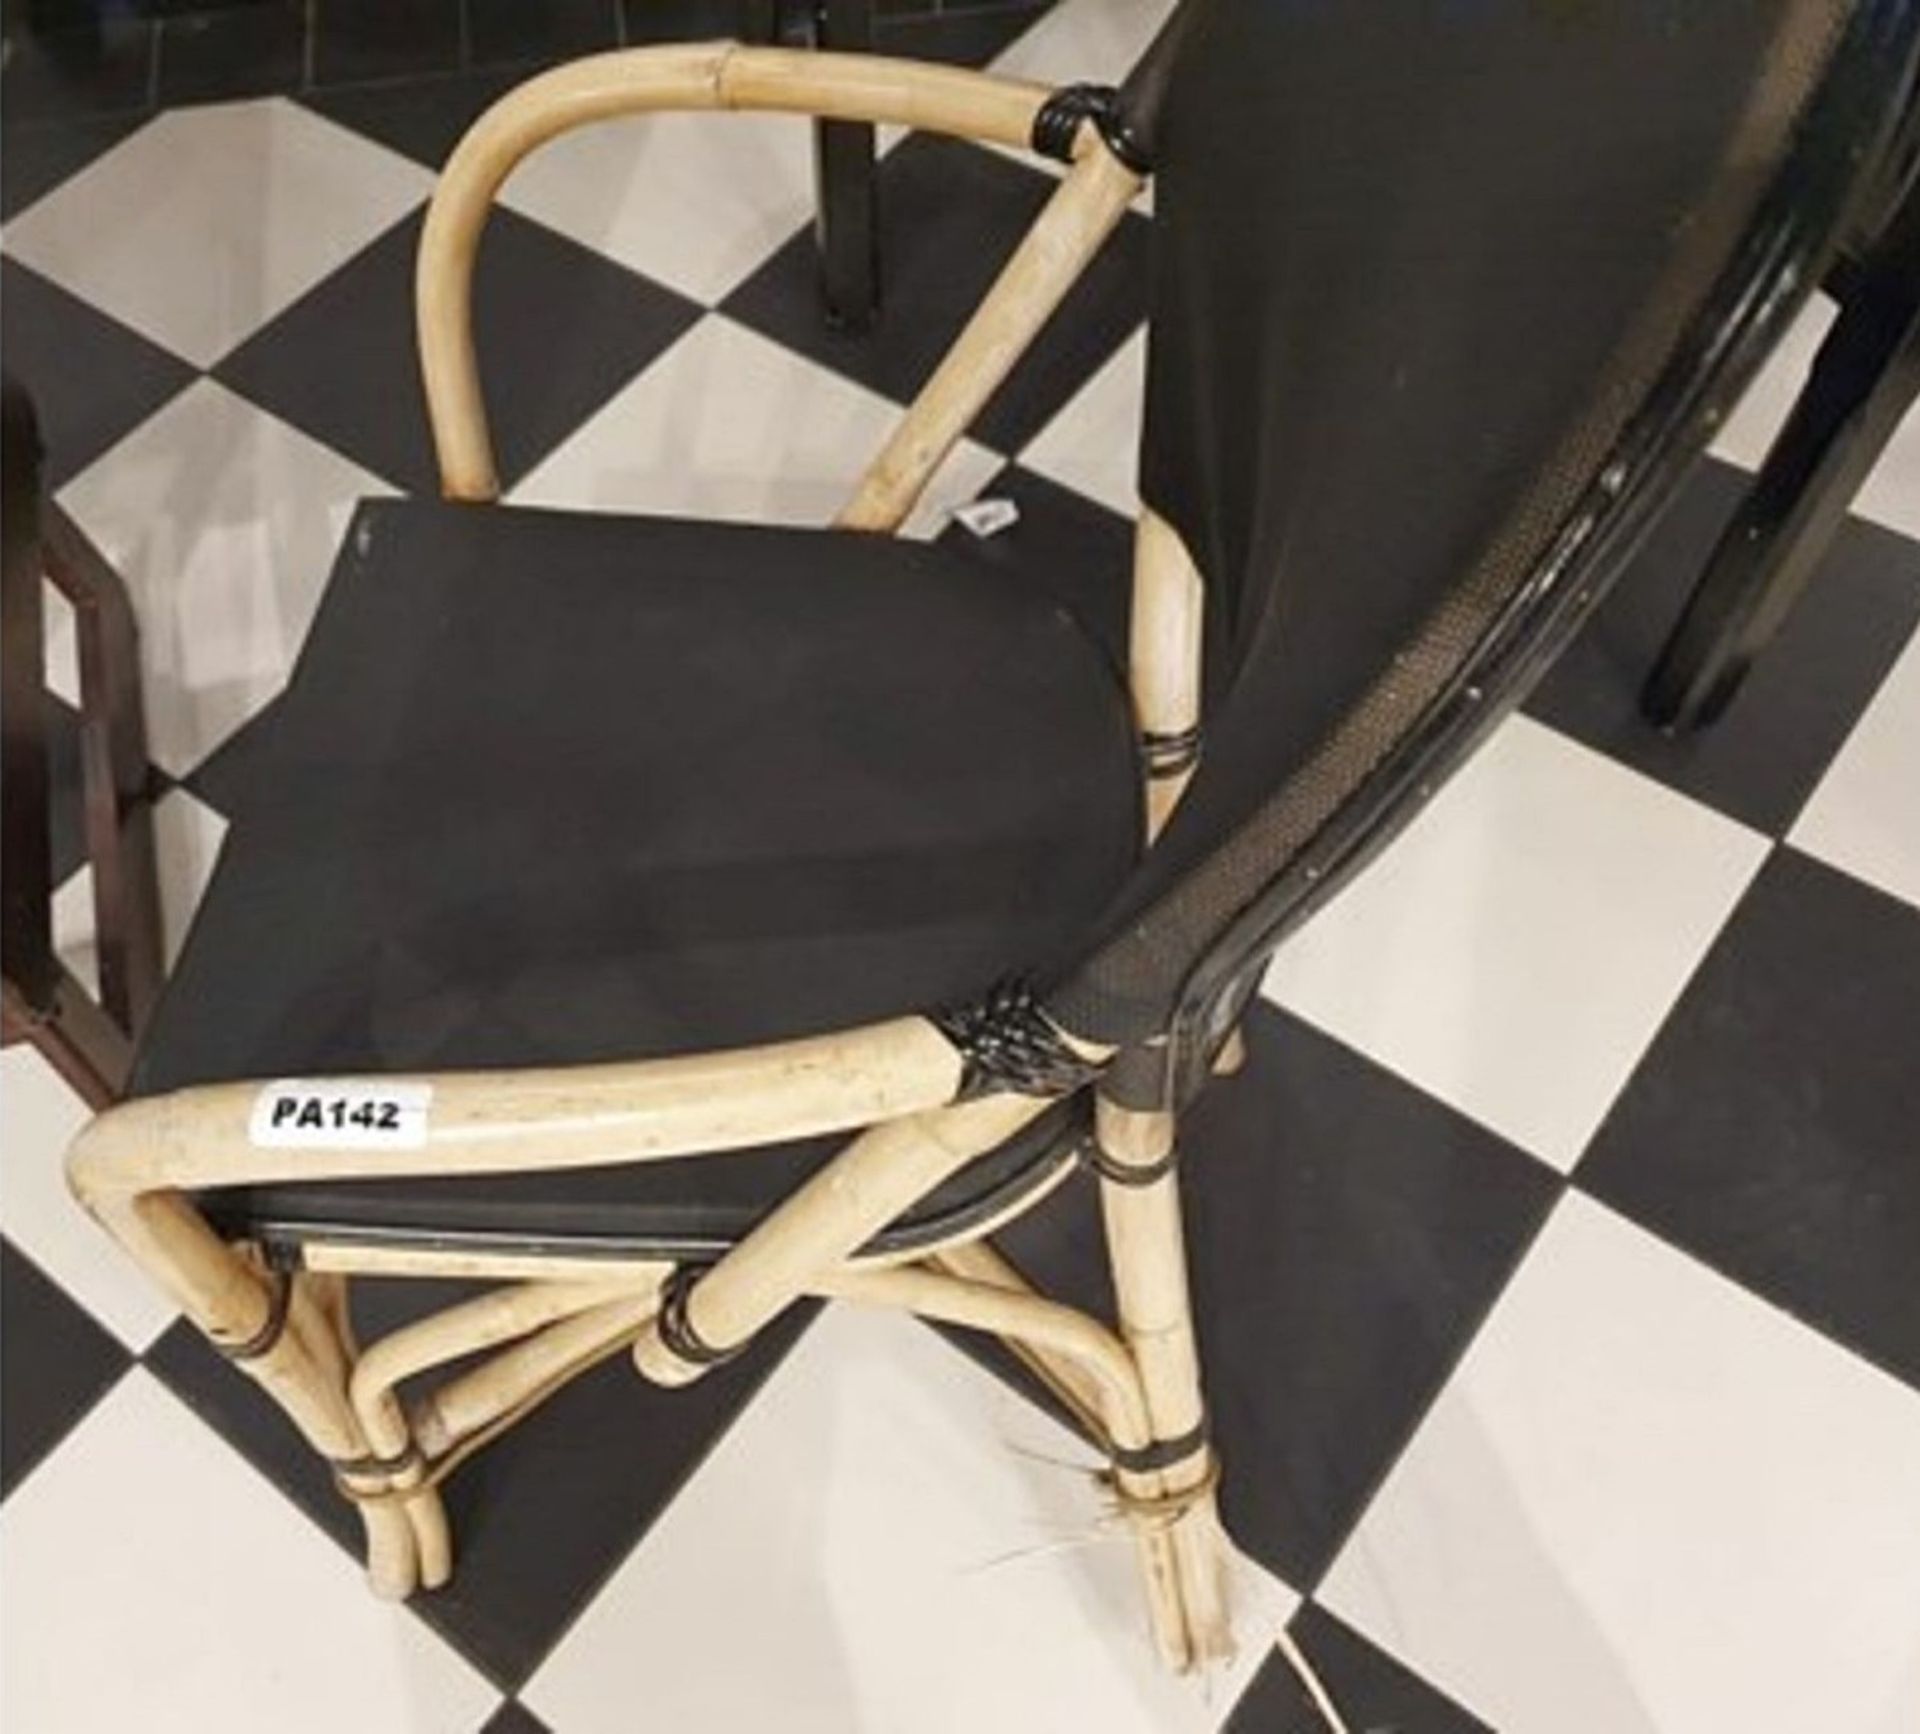 1 x Bamboo Studio Chair With Black Seat and Back Rest - Features the Name 'PAUL' Printed on the Back - Image 2 of 3